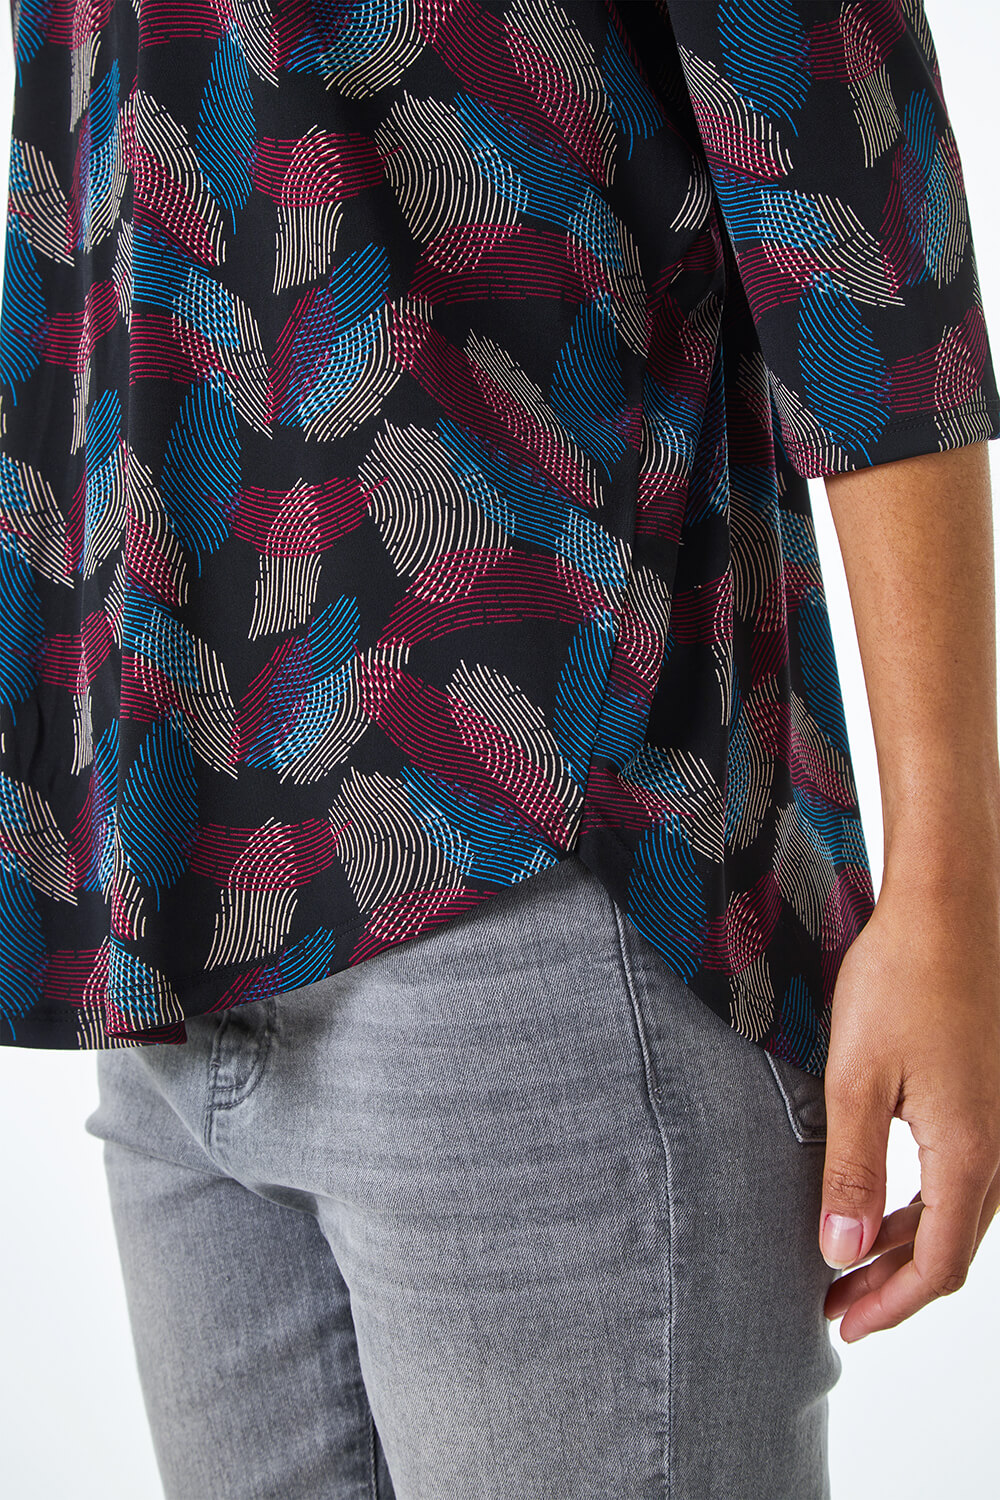 Black Abstract Linear Print Top, Image 5 of 5